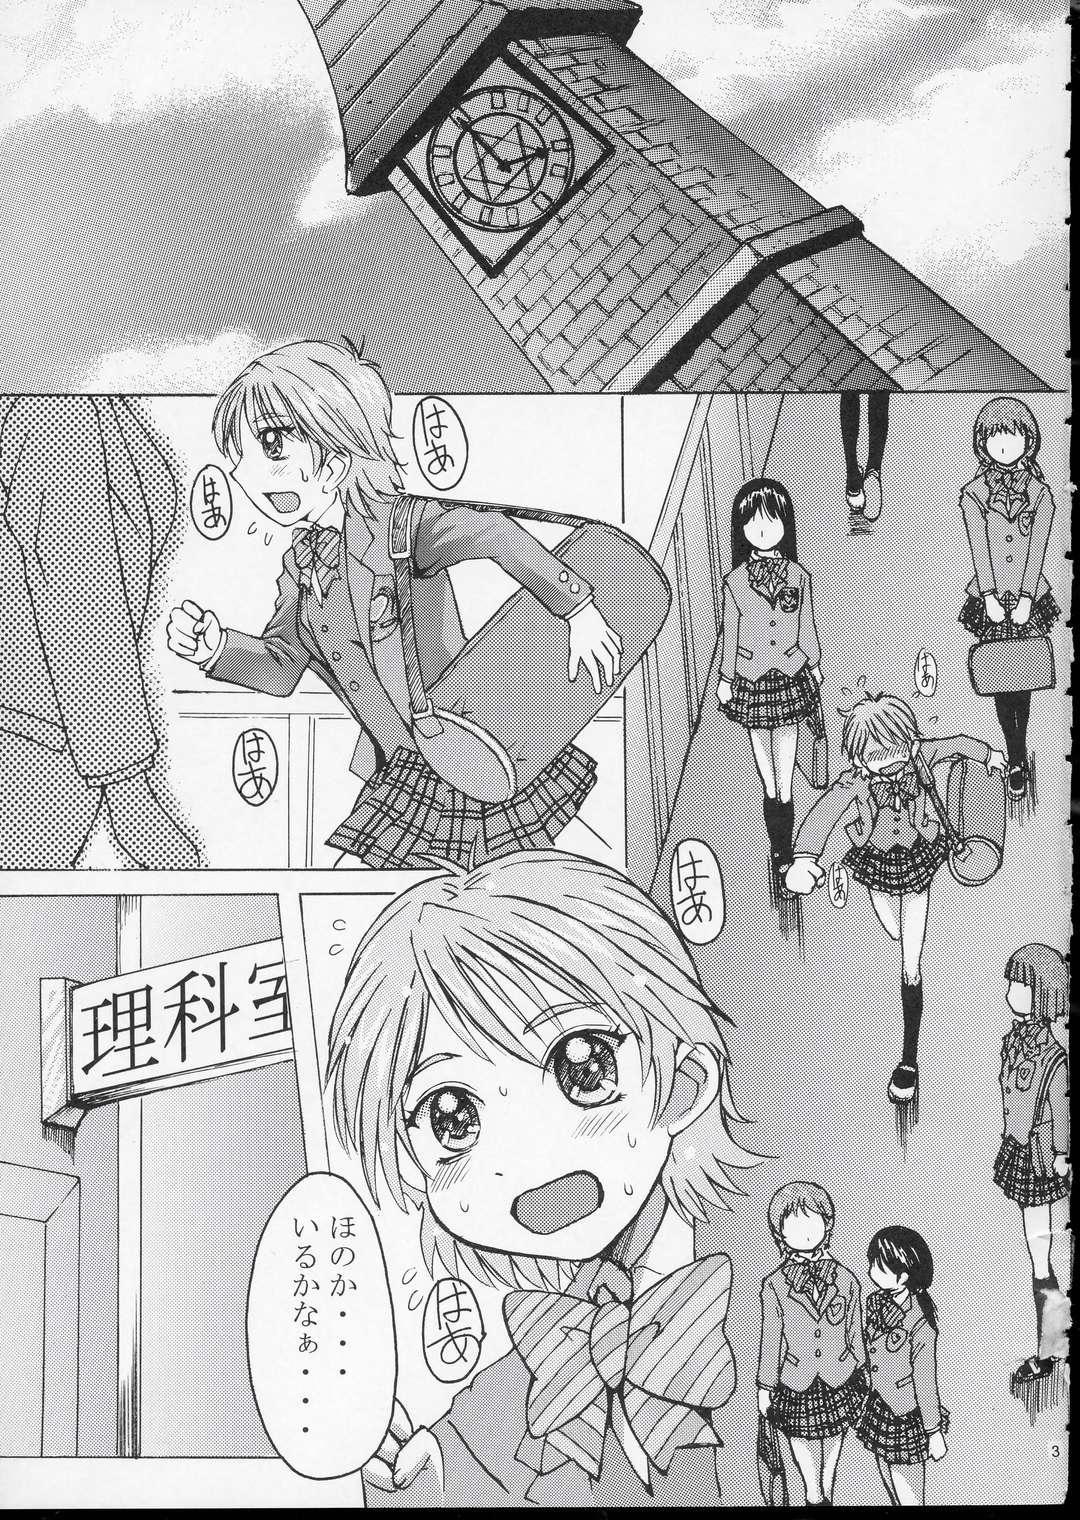 Free Amature Porn Kuroi Taiyou Kage no Tsuki EPISODE 1: In order that all may love you - Black Sun and Shadow Moon - Pretty cure Group - Page 4